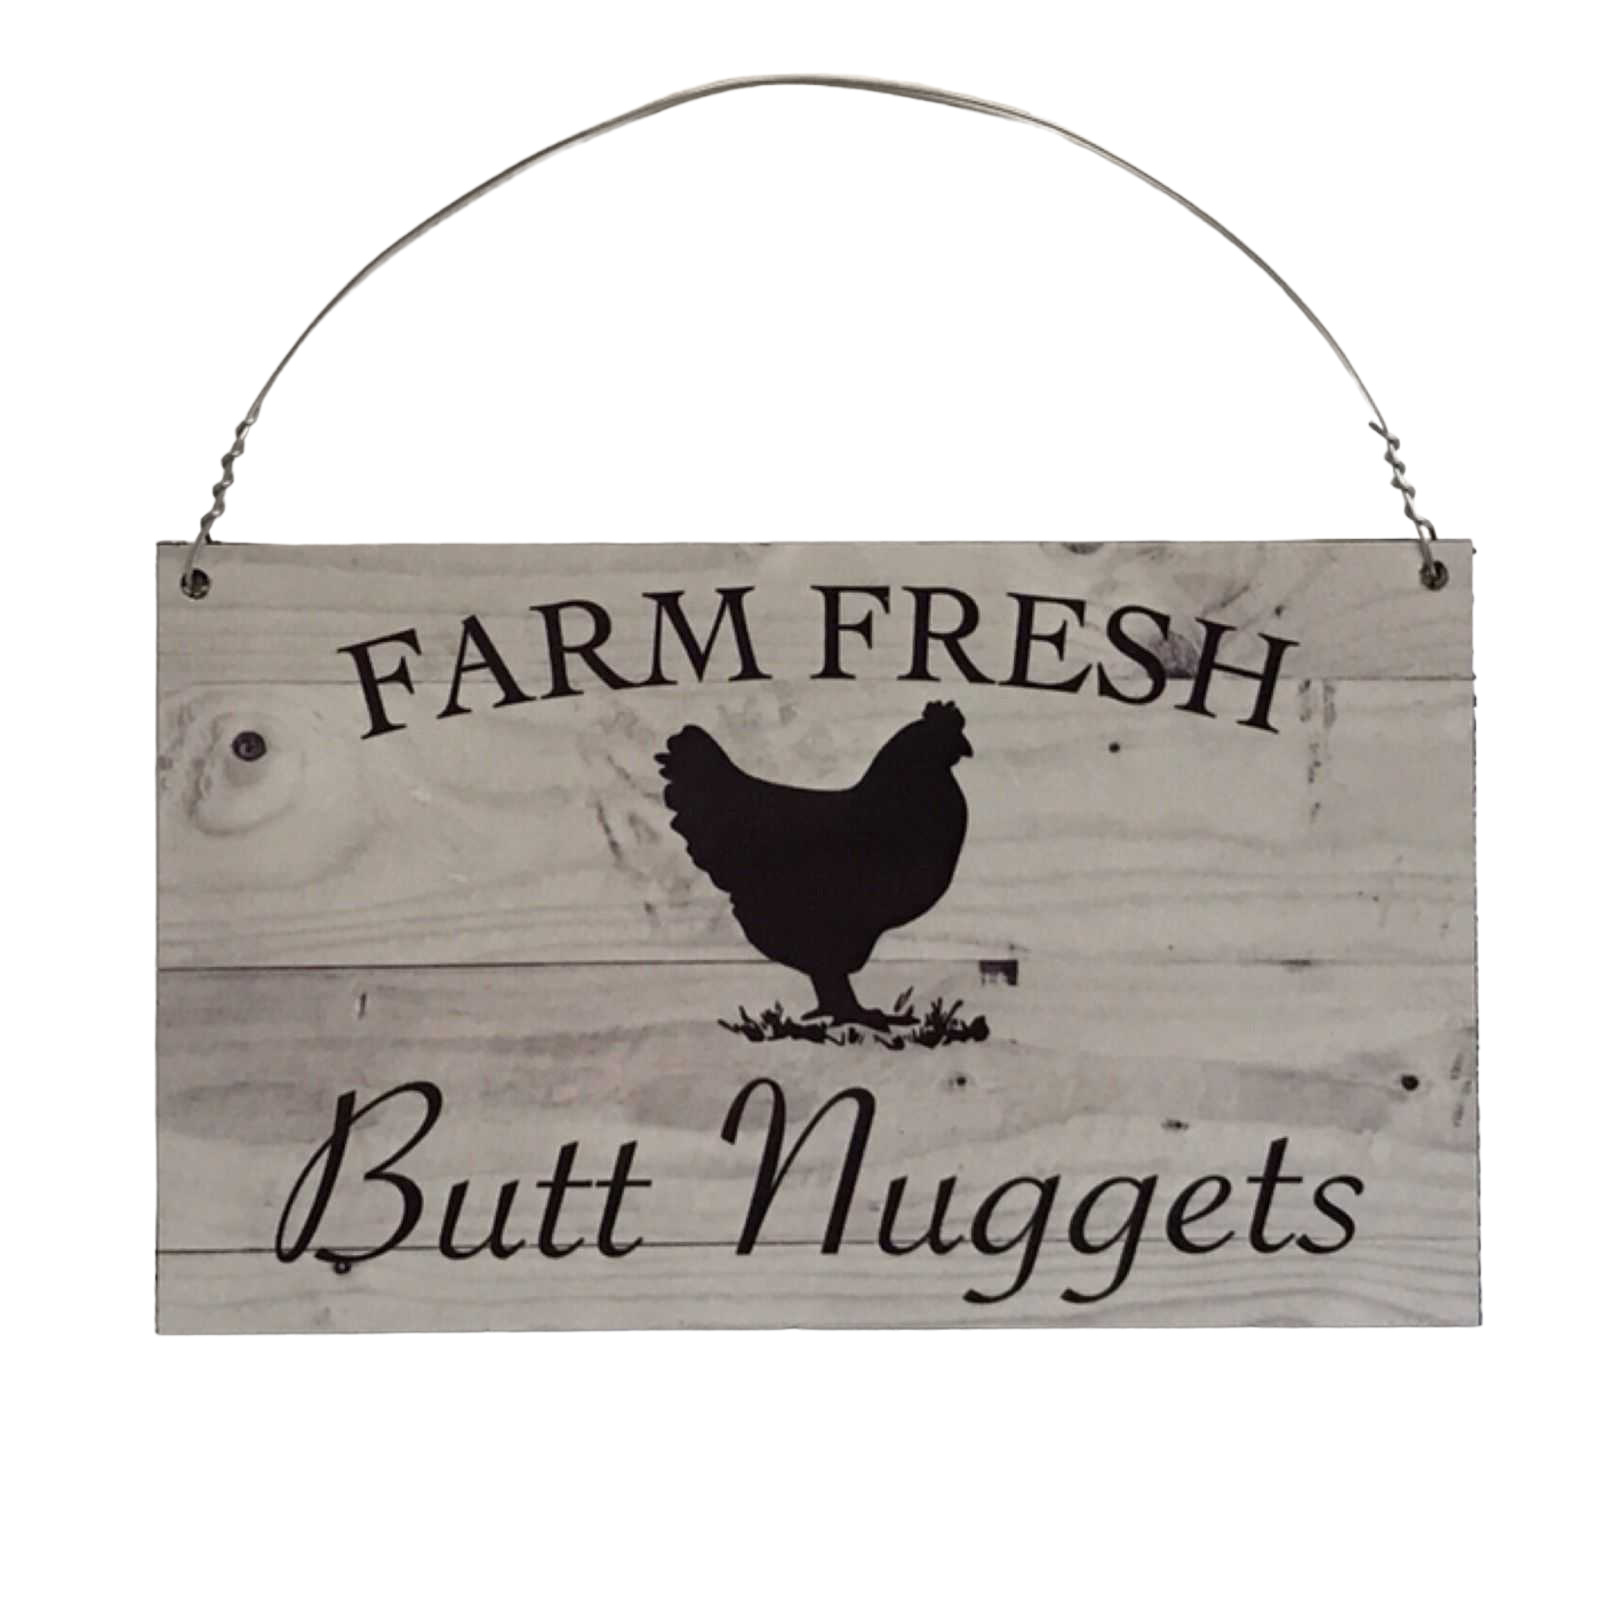 Farm Fresh Butt Nuggets Chicken Sign - The Renmy Store Homewares & Gifts 